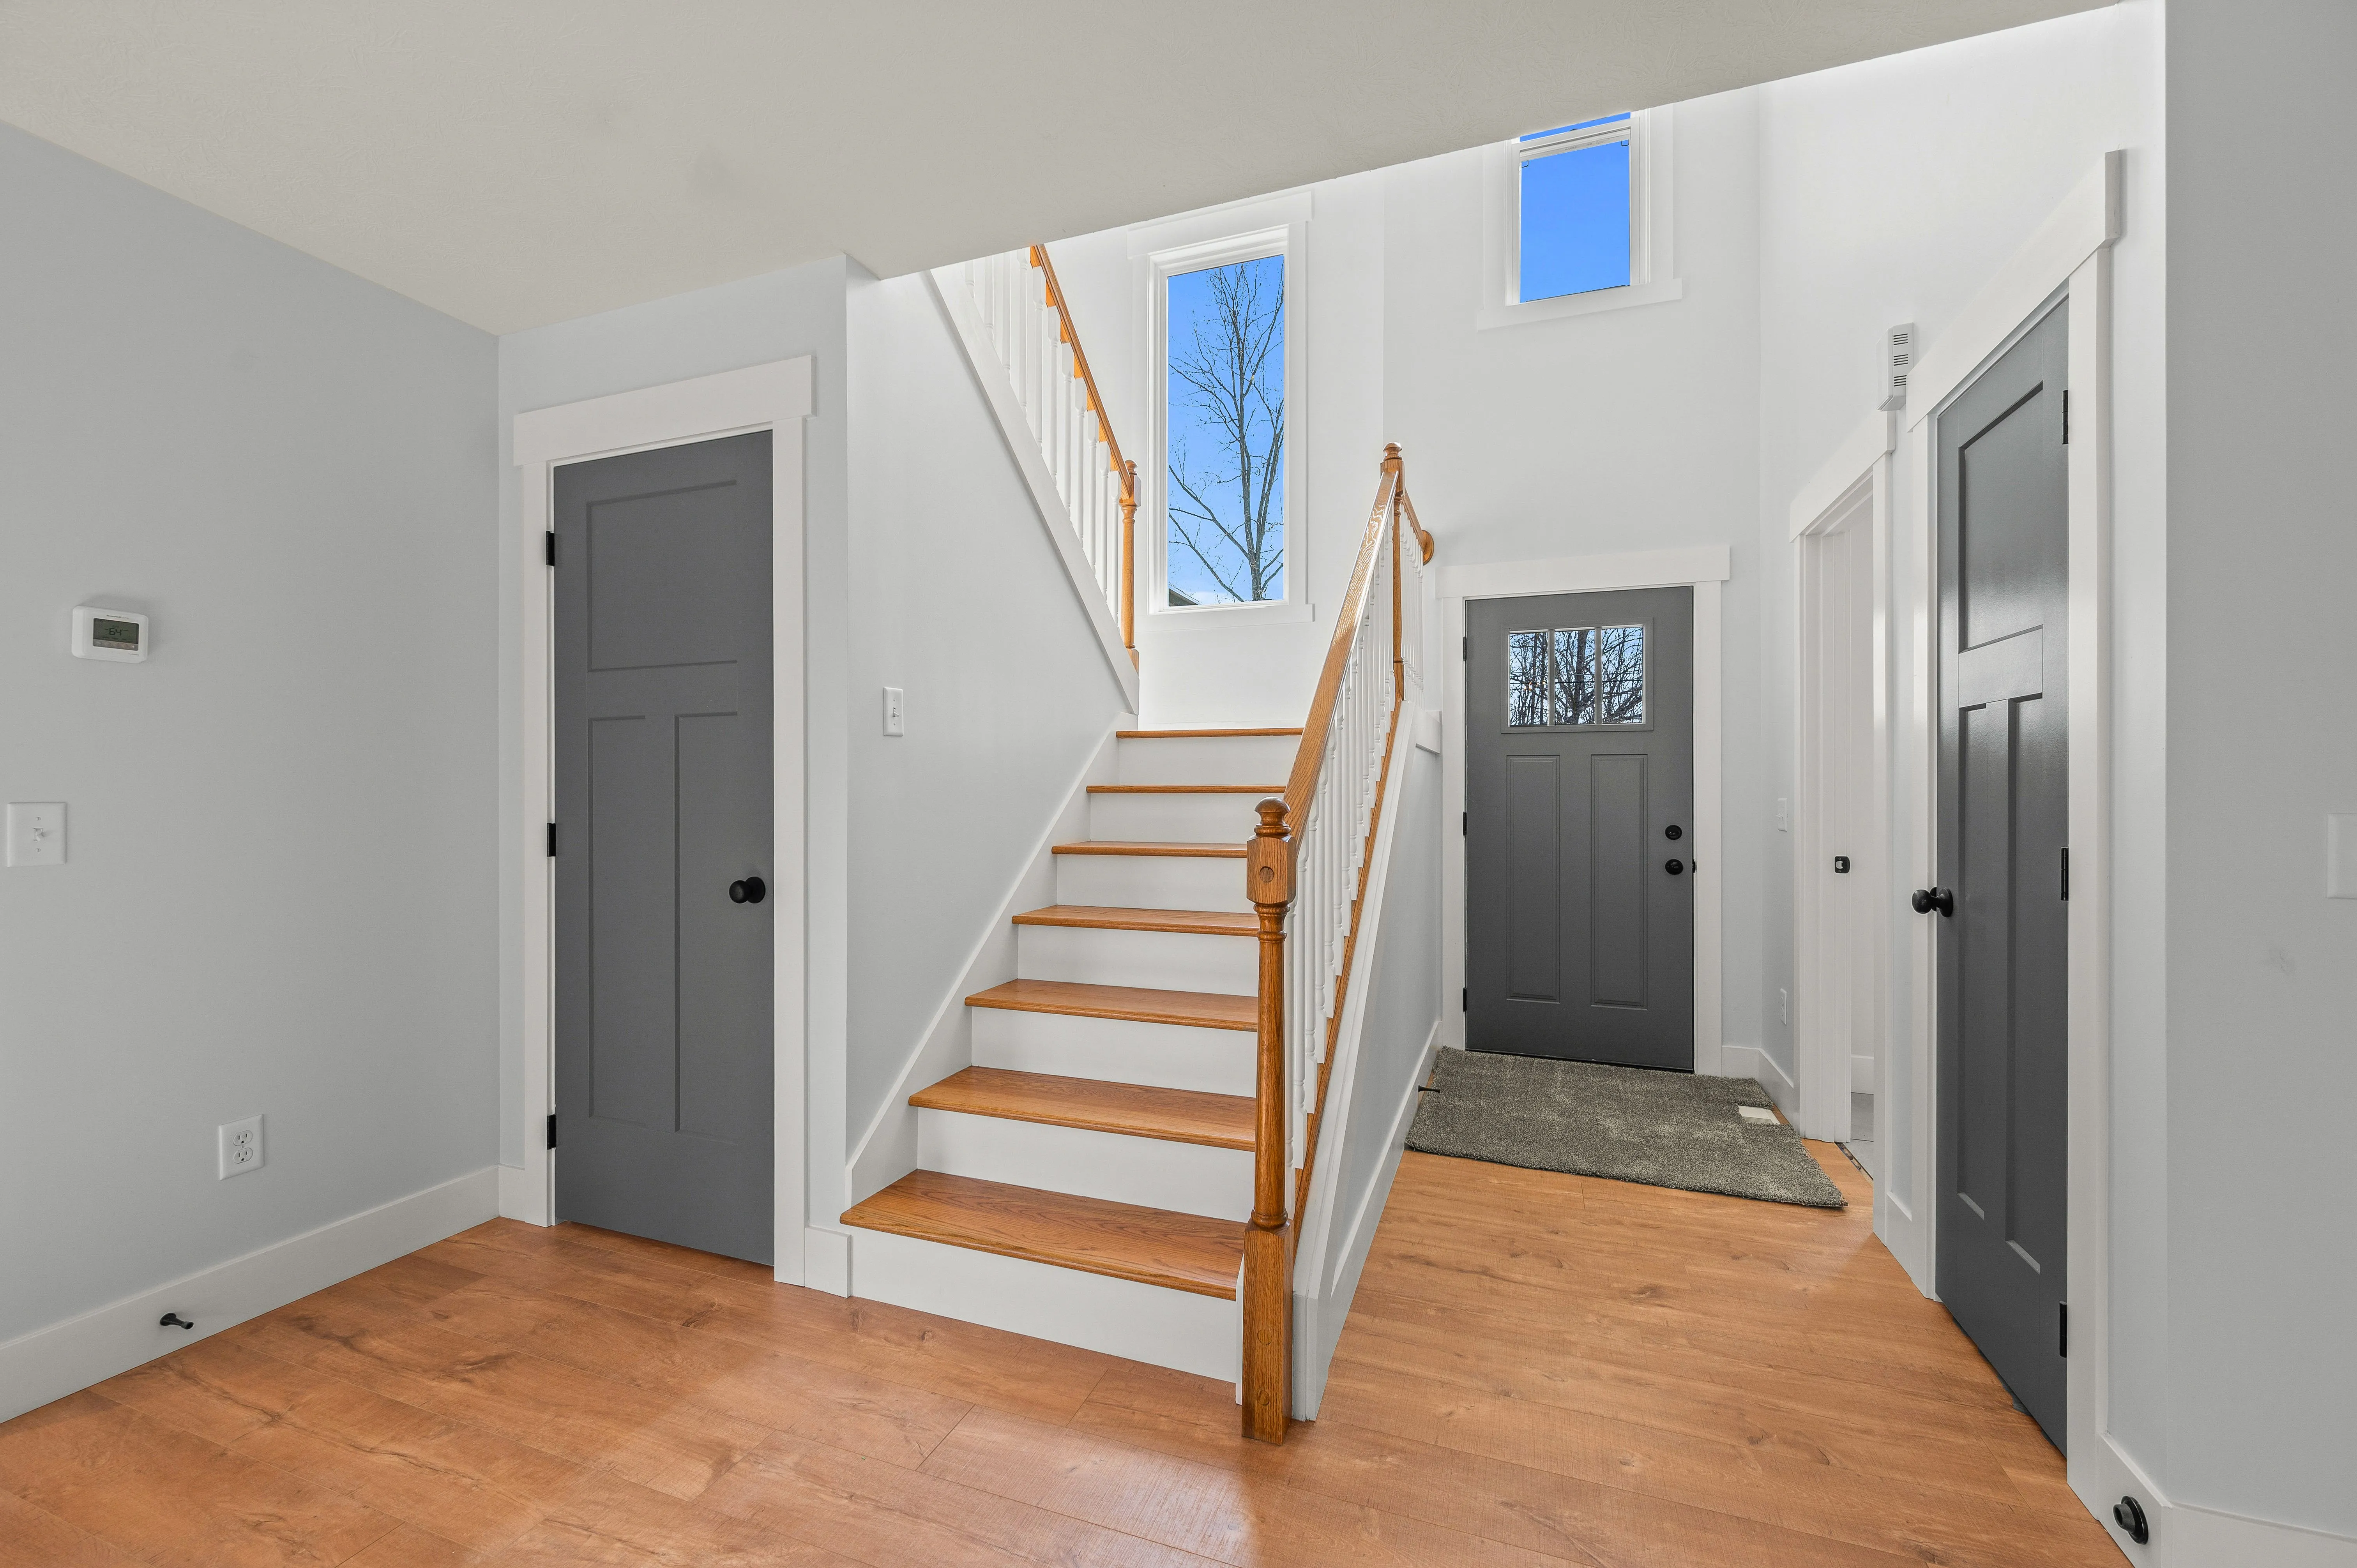 Bright entryway with wooden staircase, skylight, and multiple doors with dark hardware.